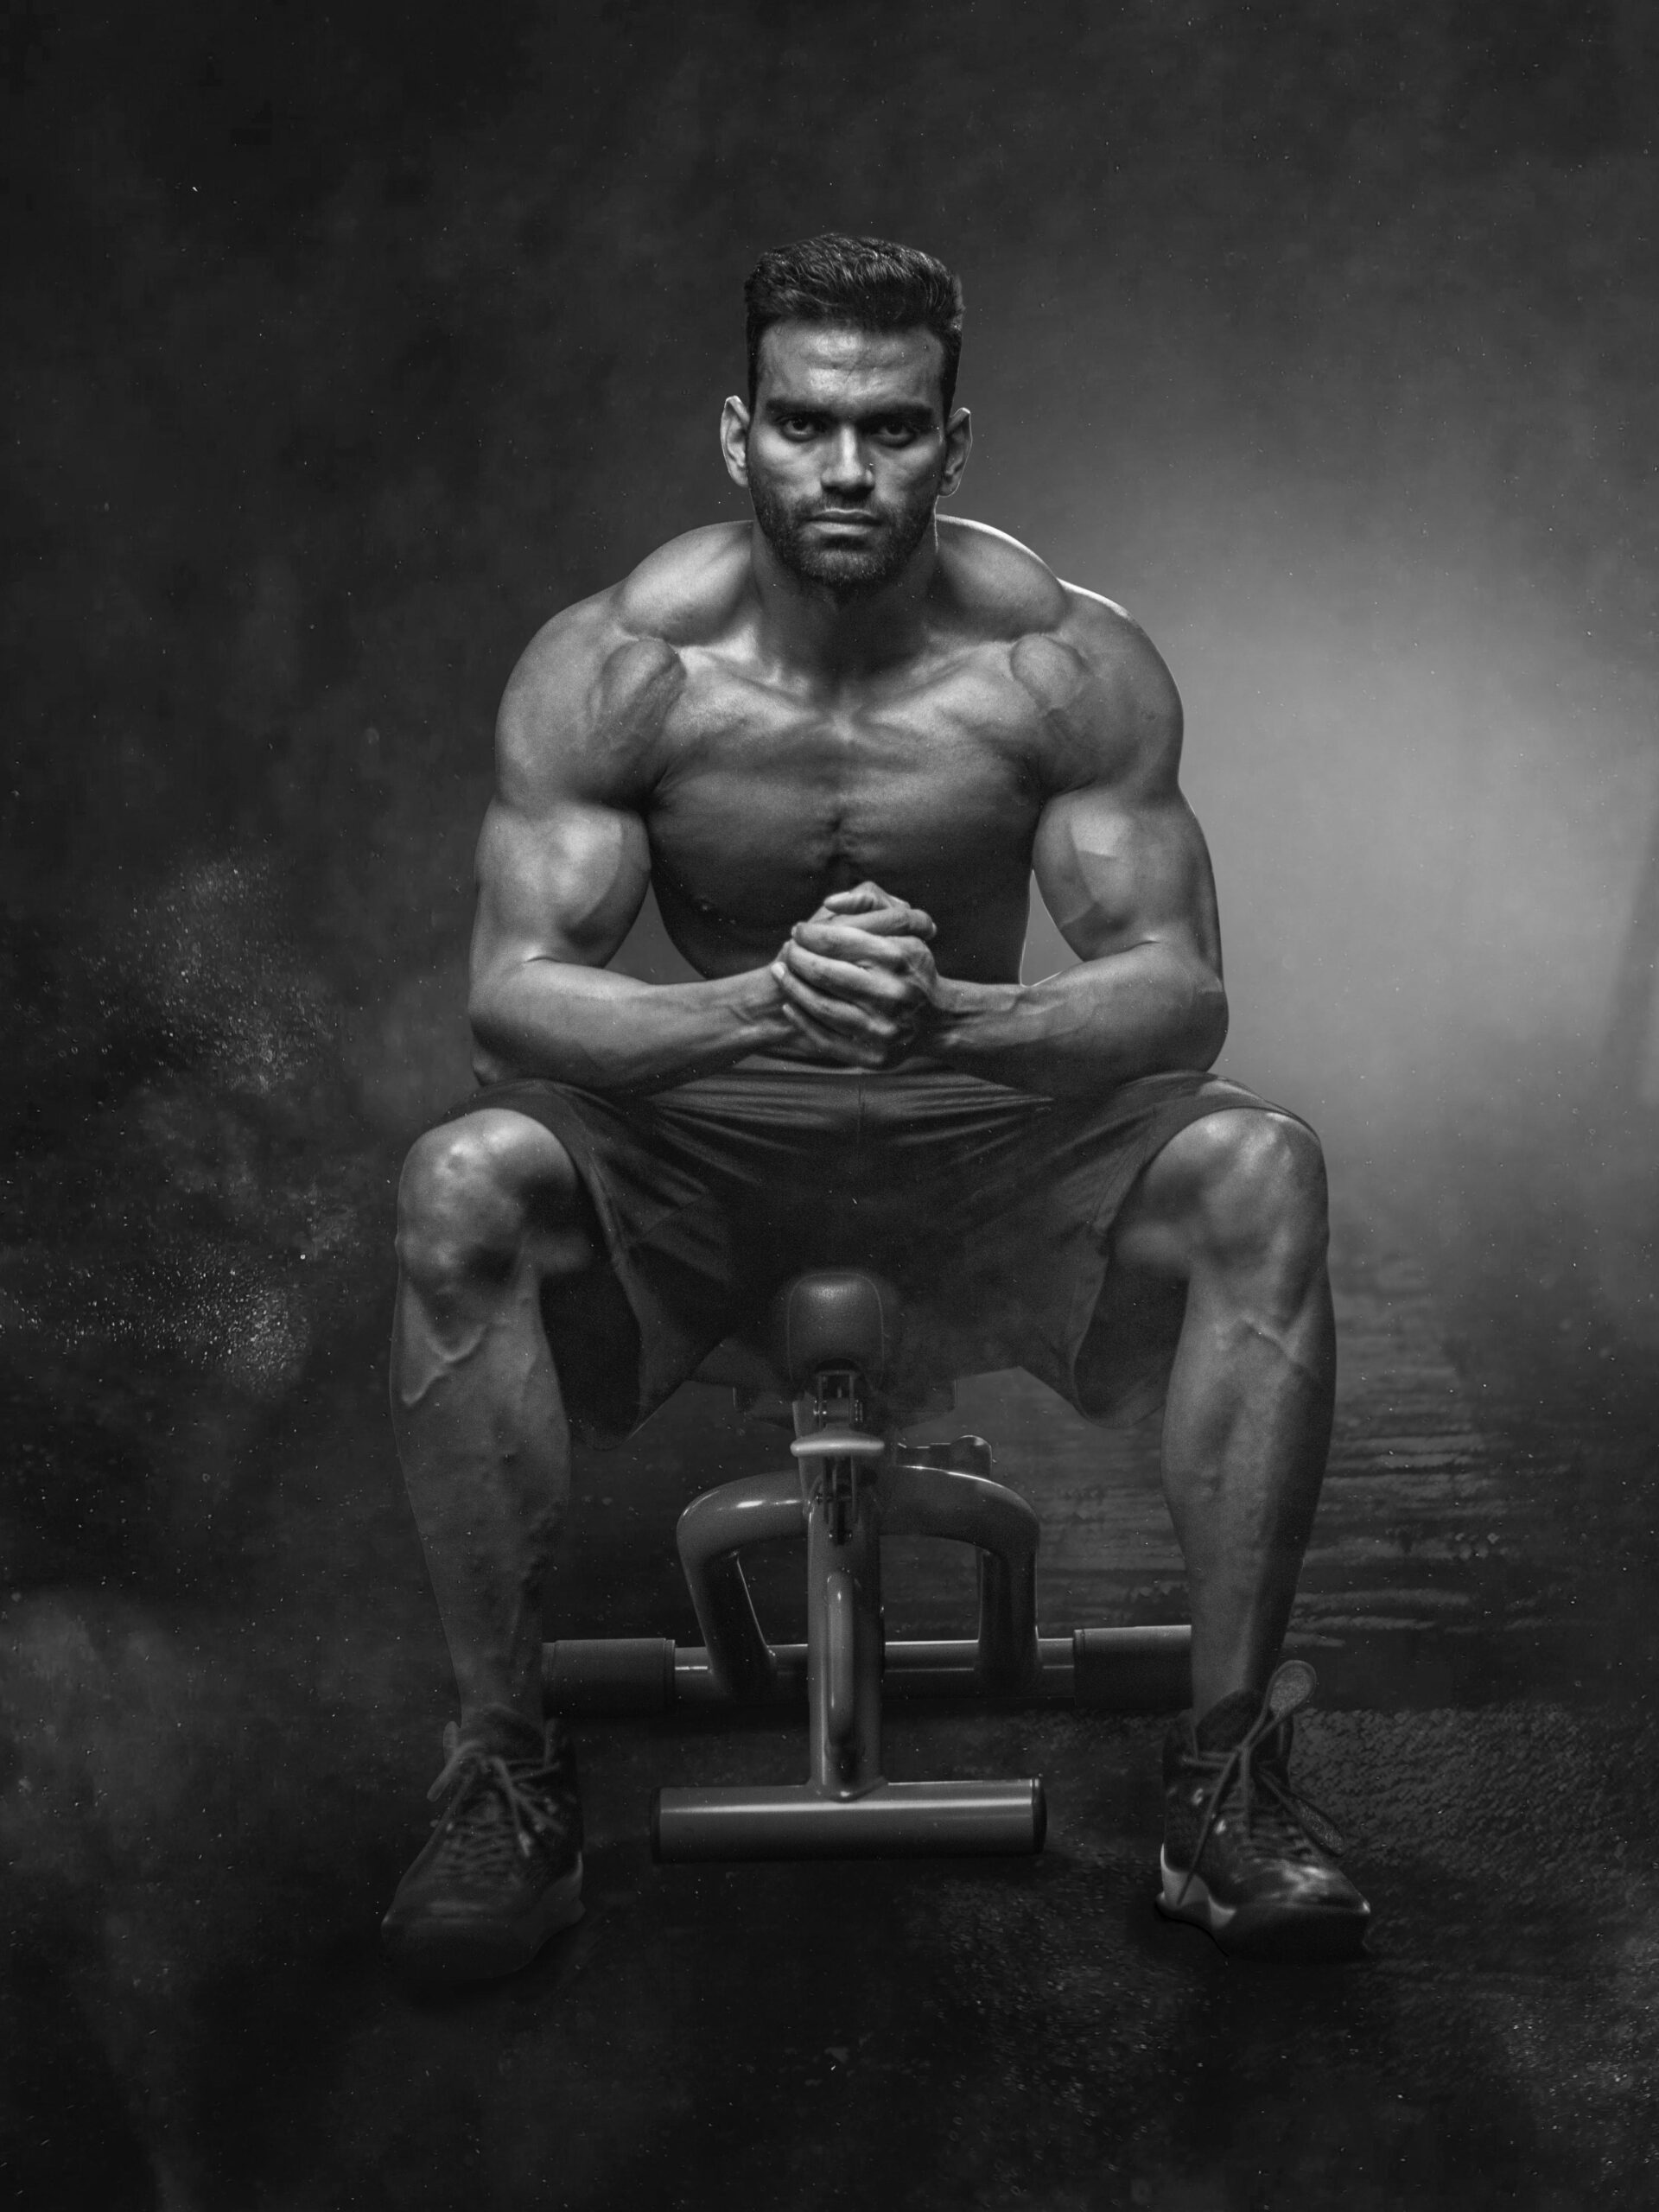 The Comprehensive Guide to Bodybuilding: An Essential Encyclopedia